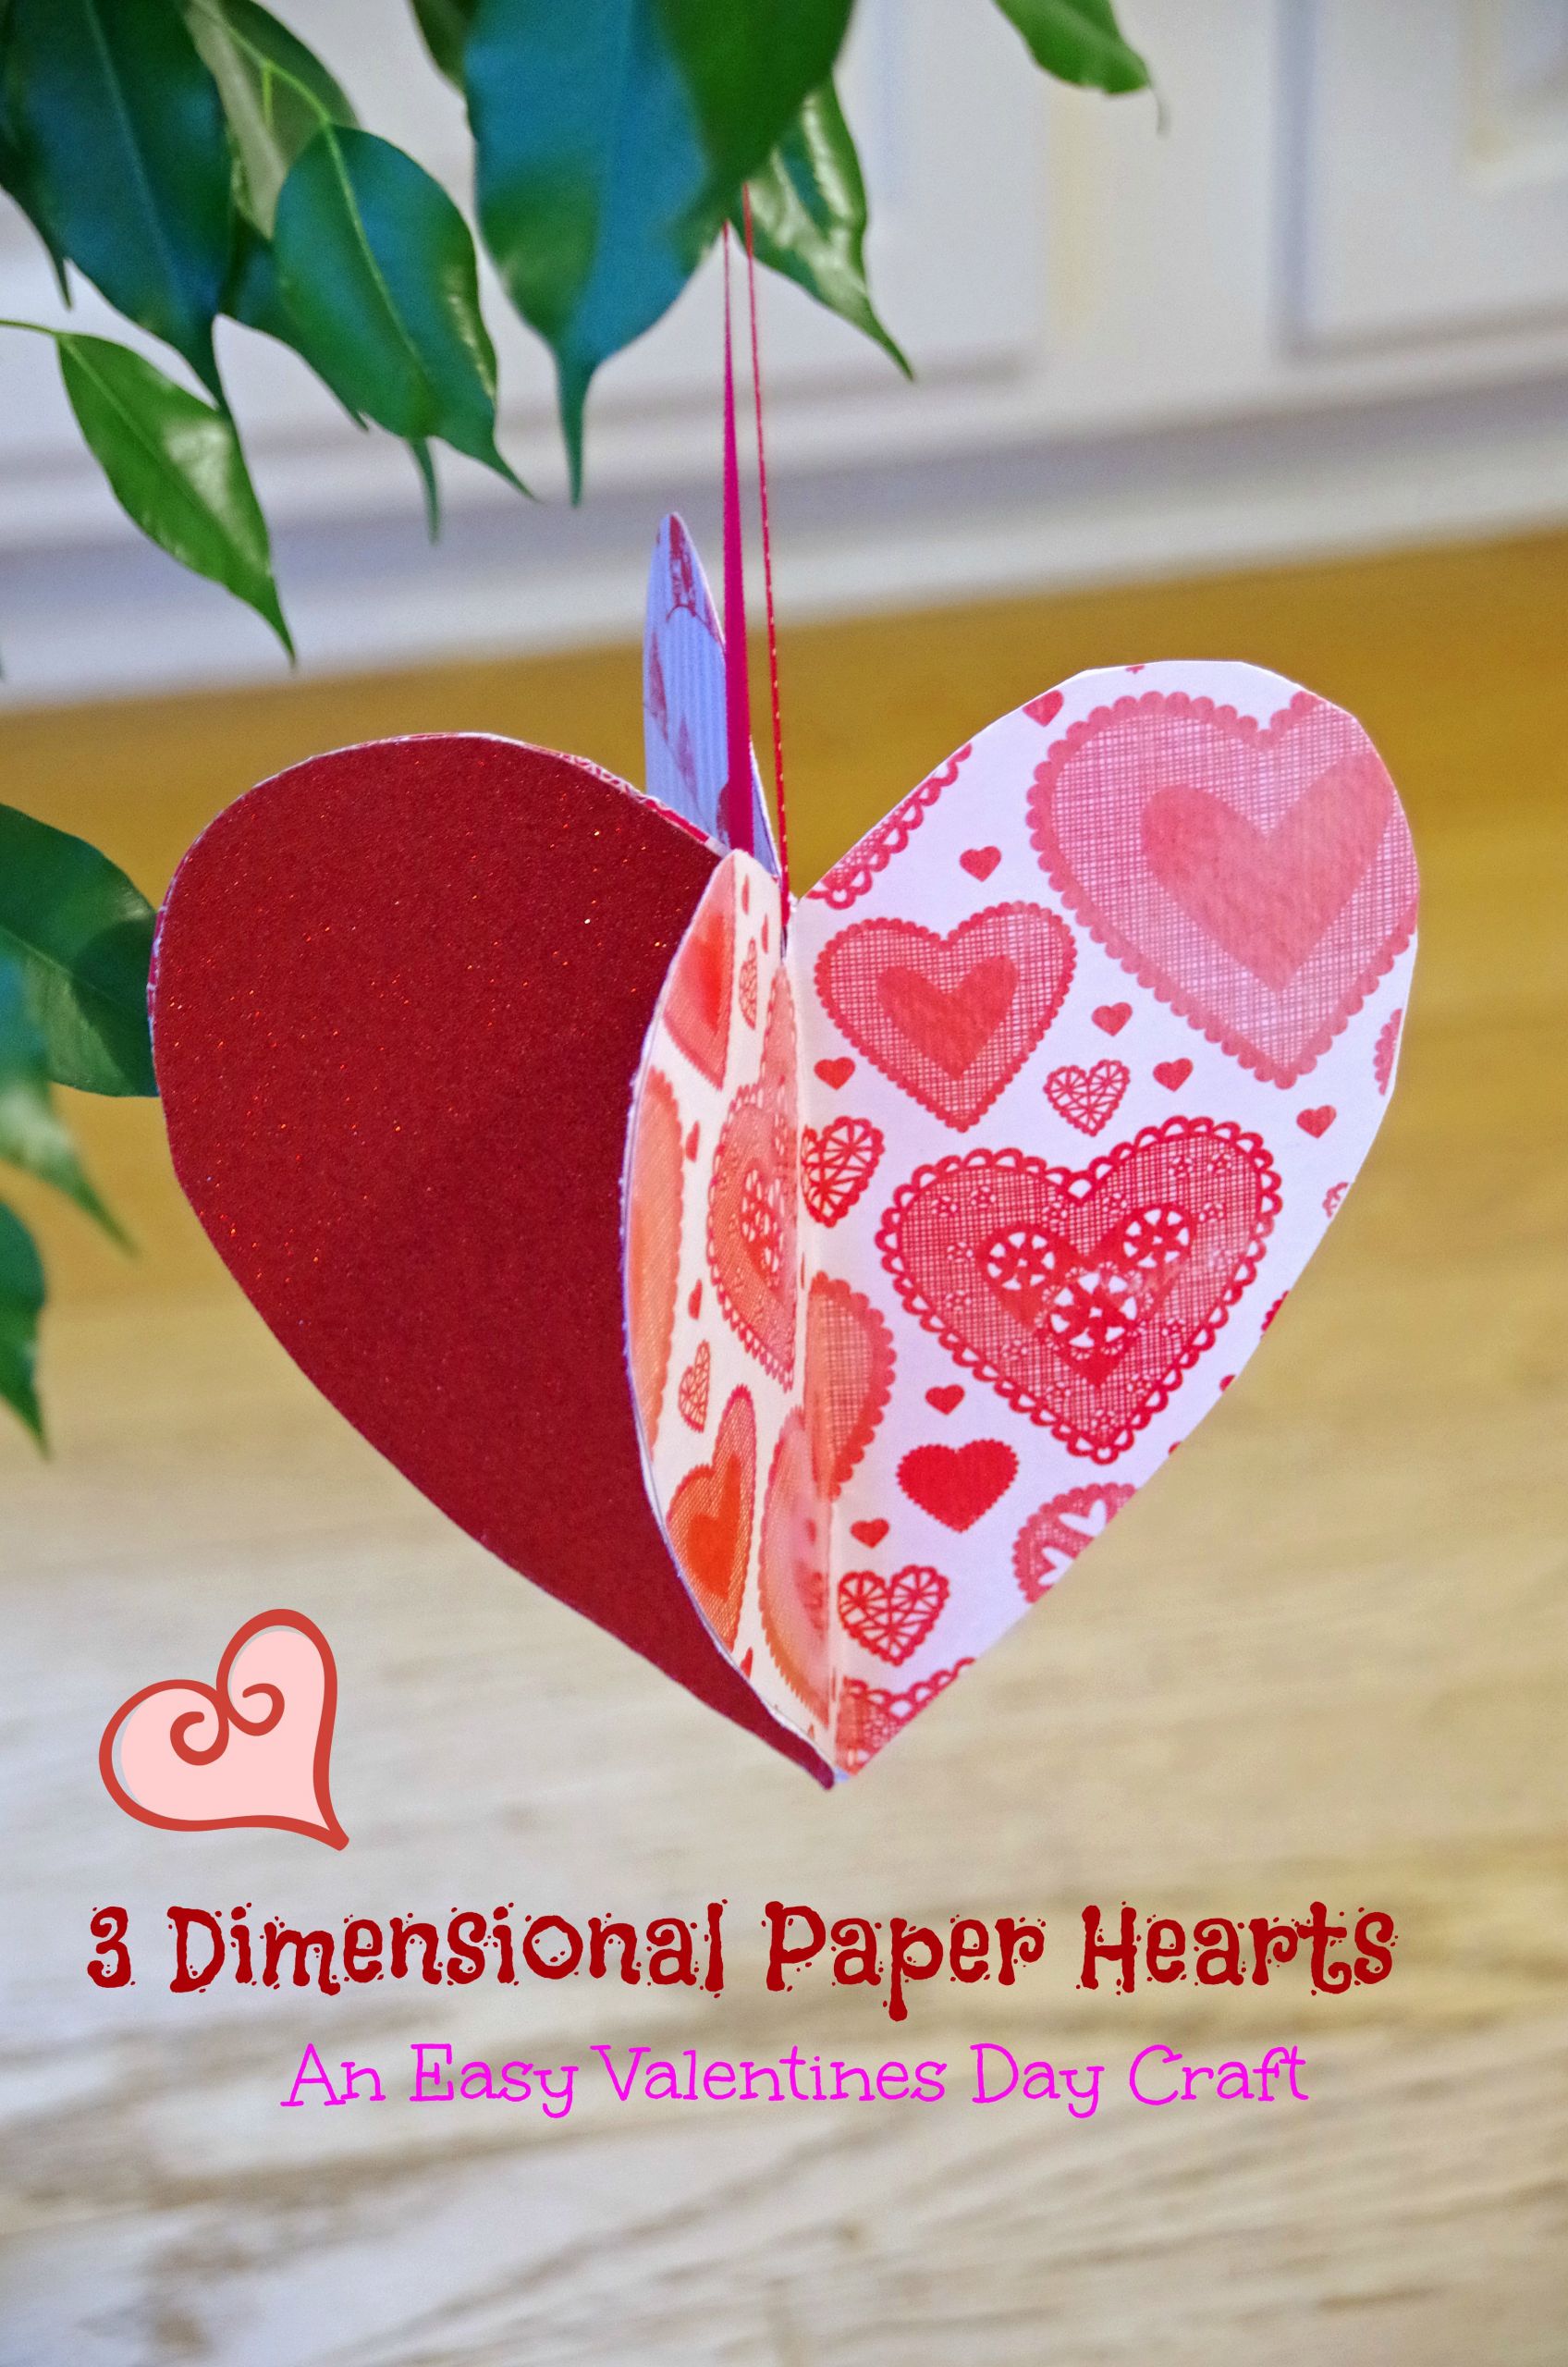 Valentines Craft Ideas For Adults
 Easy Valentines Day Craft Idea Make 3D Paper Hearts